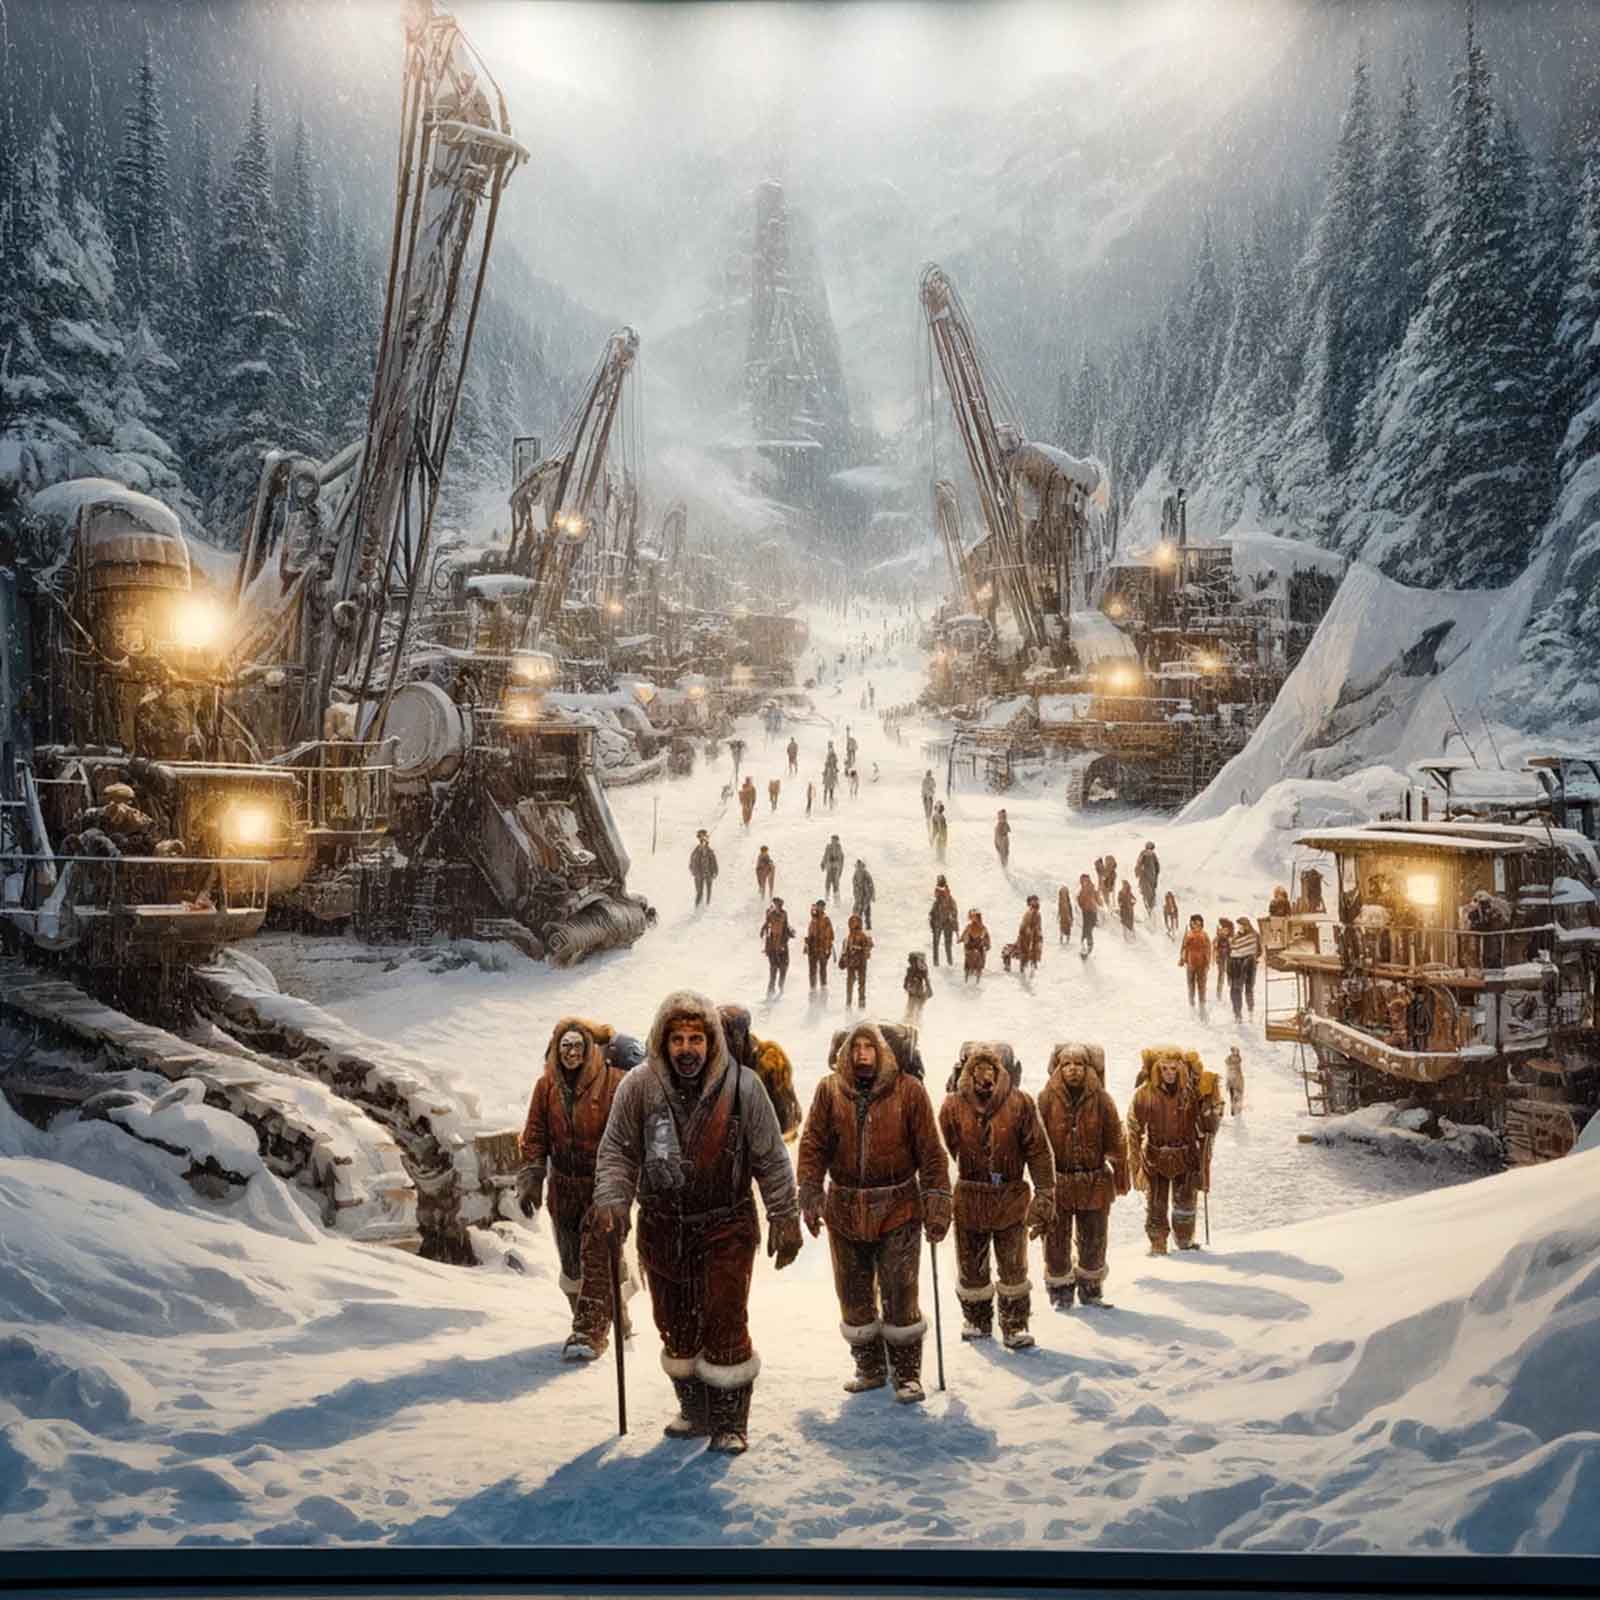 miners walking through gold camp